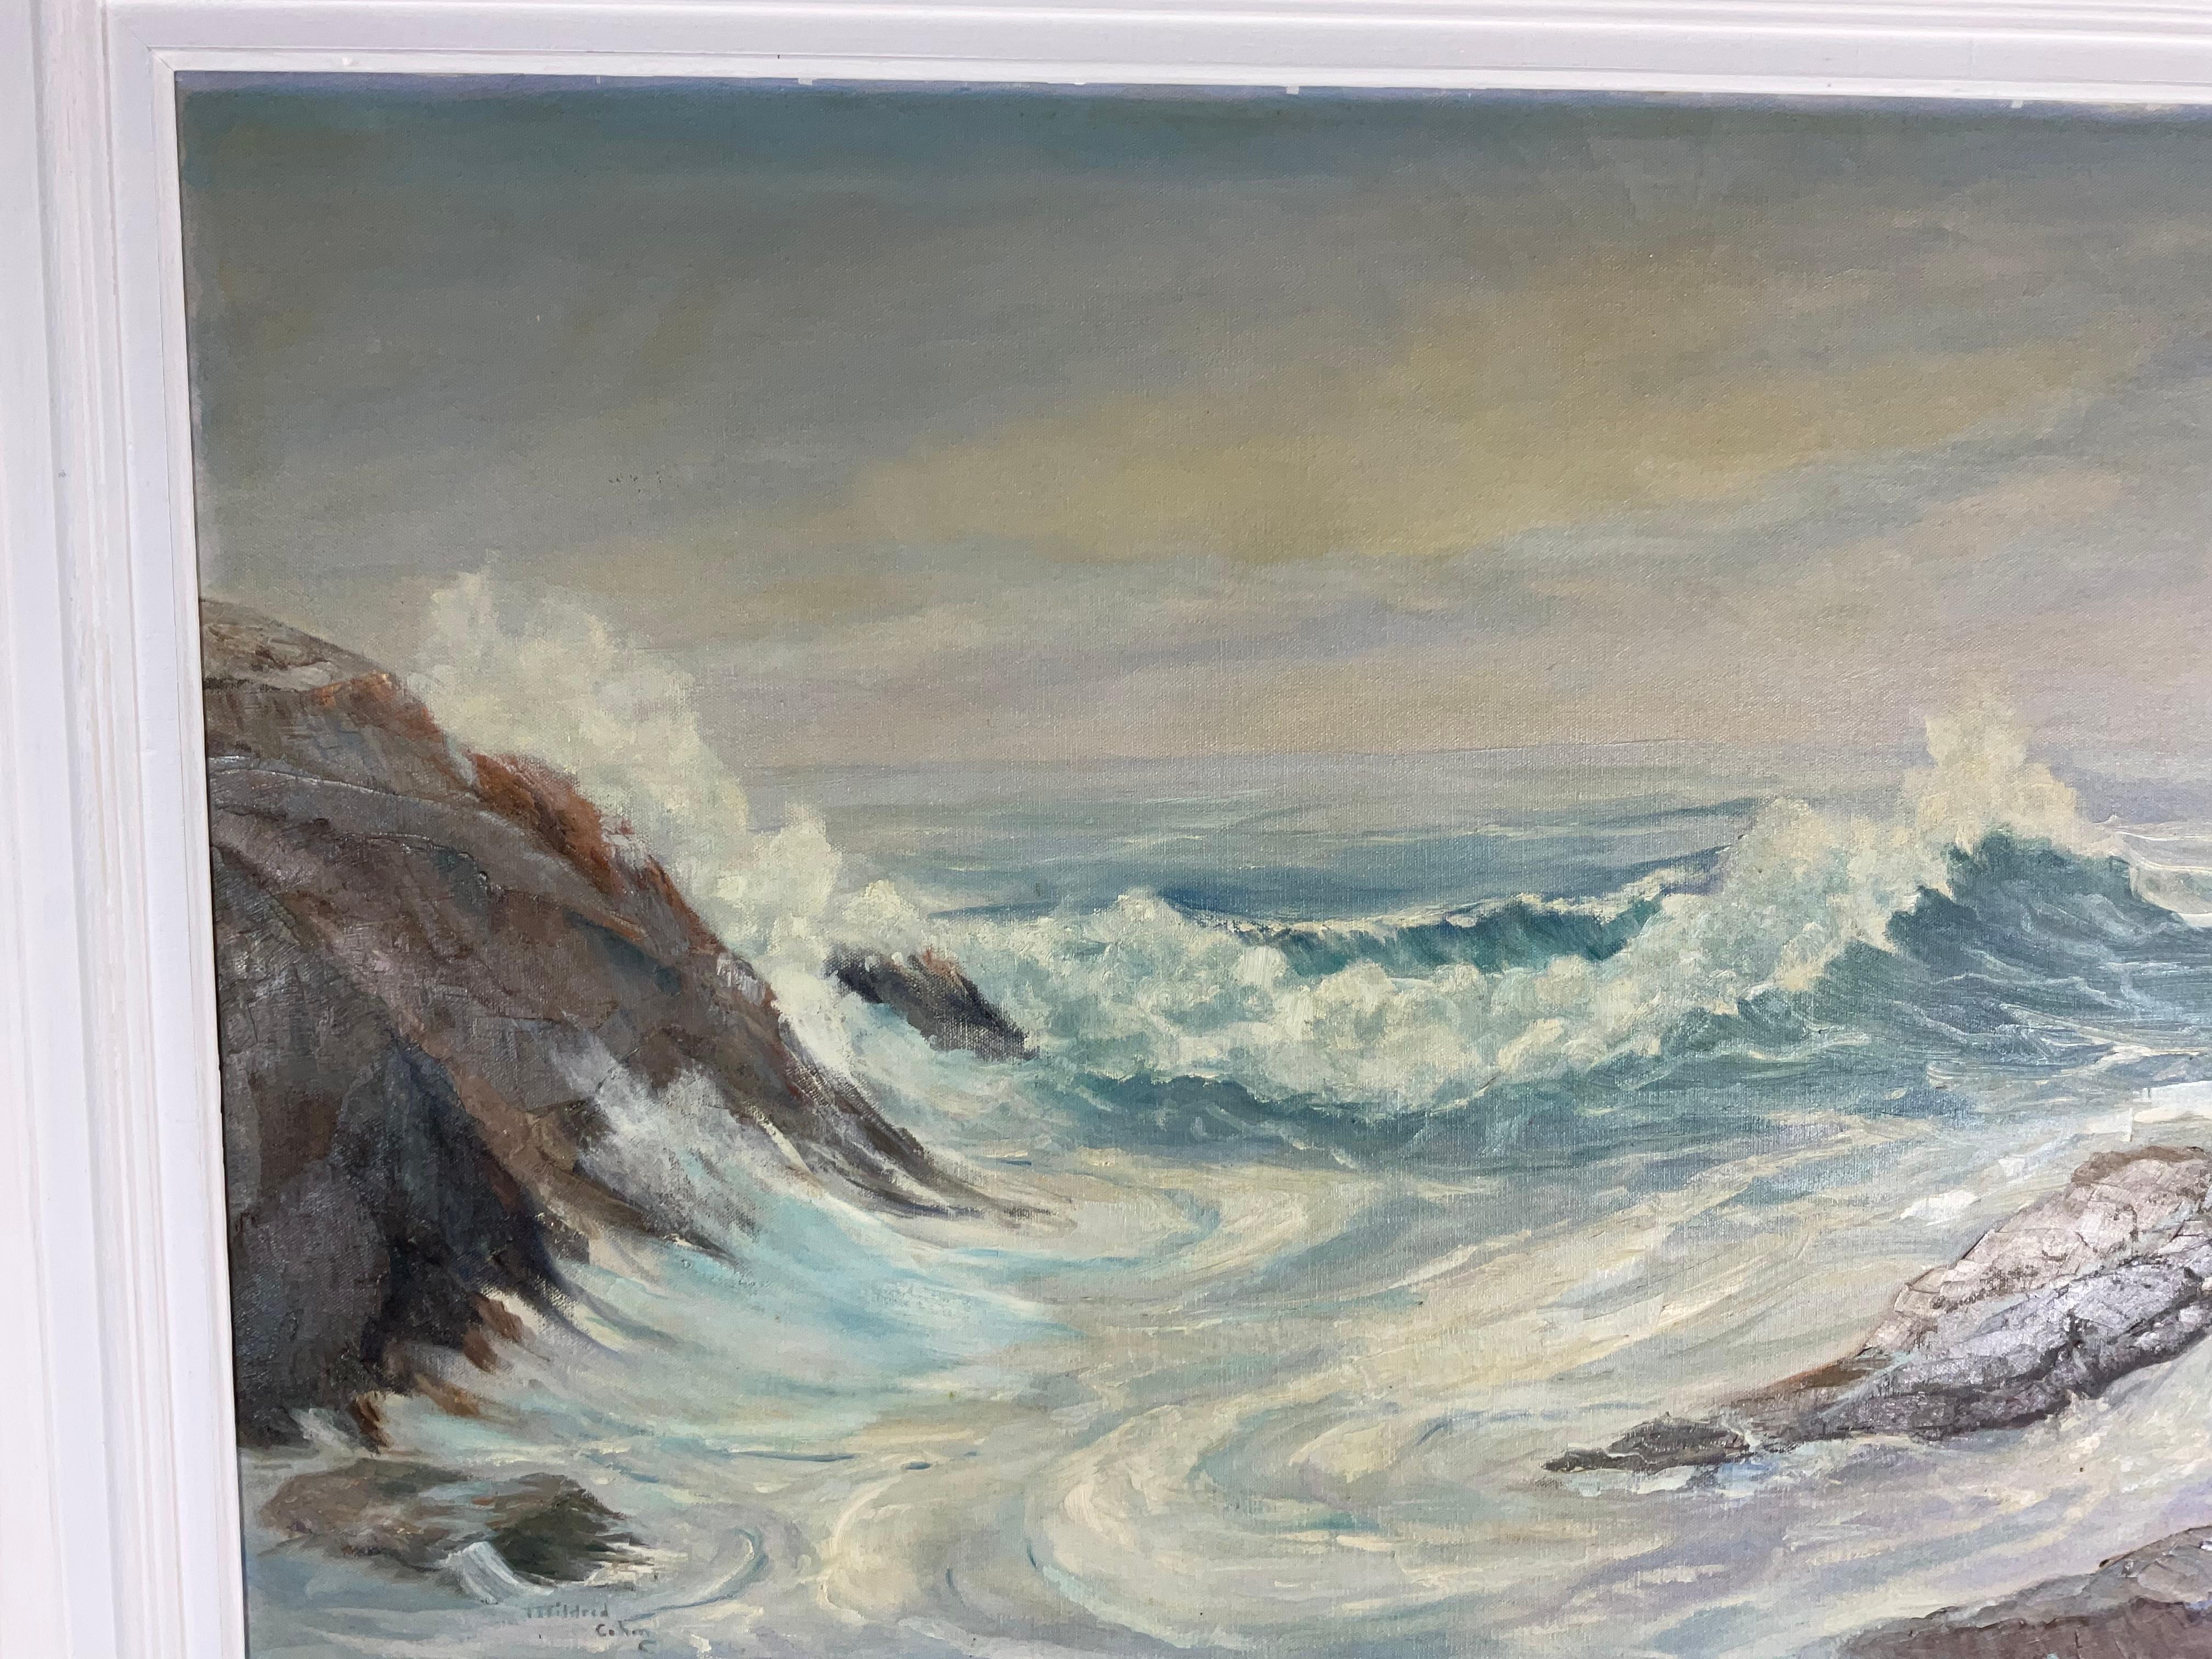 American Classical Vintage, Stormy Seascape Oil Painting on Canvas For Sale